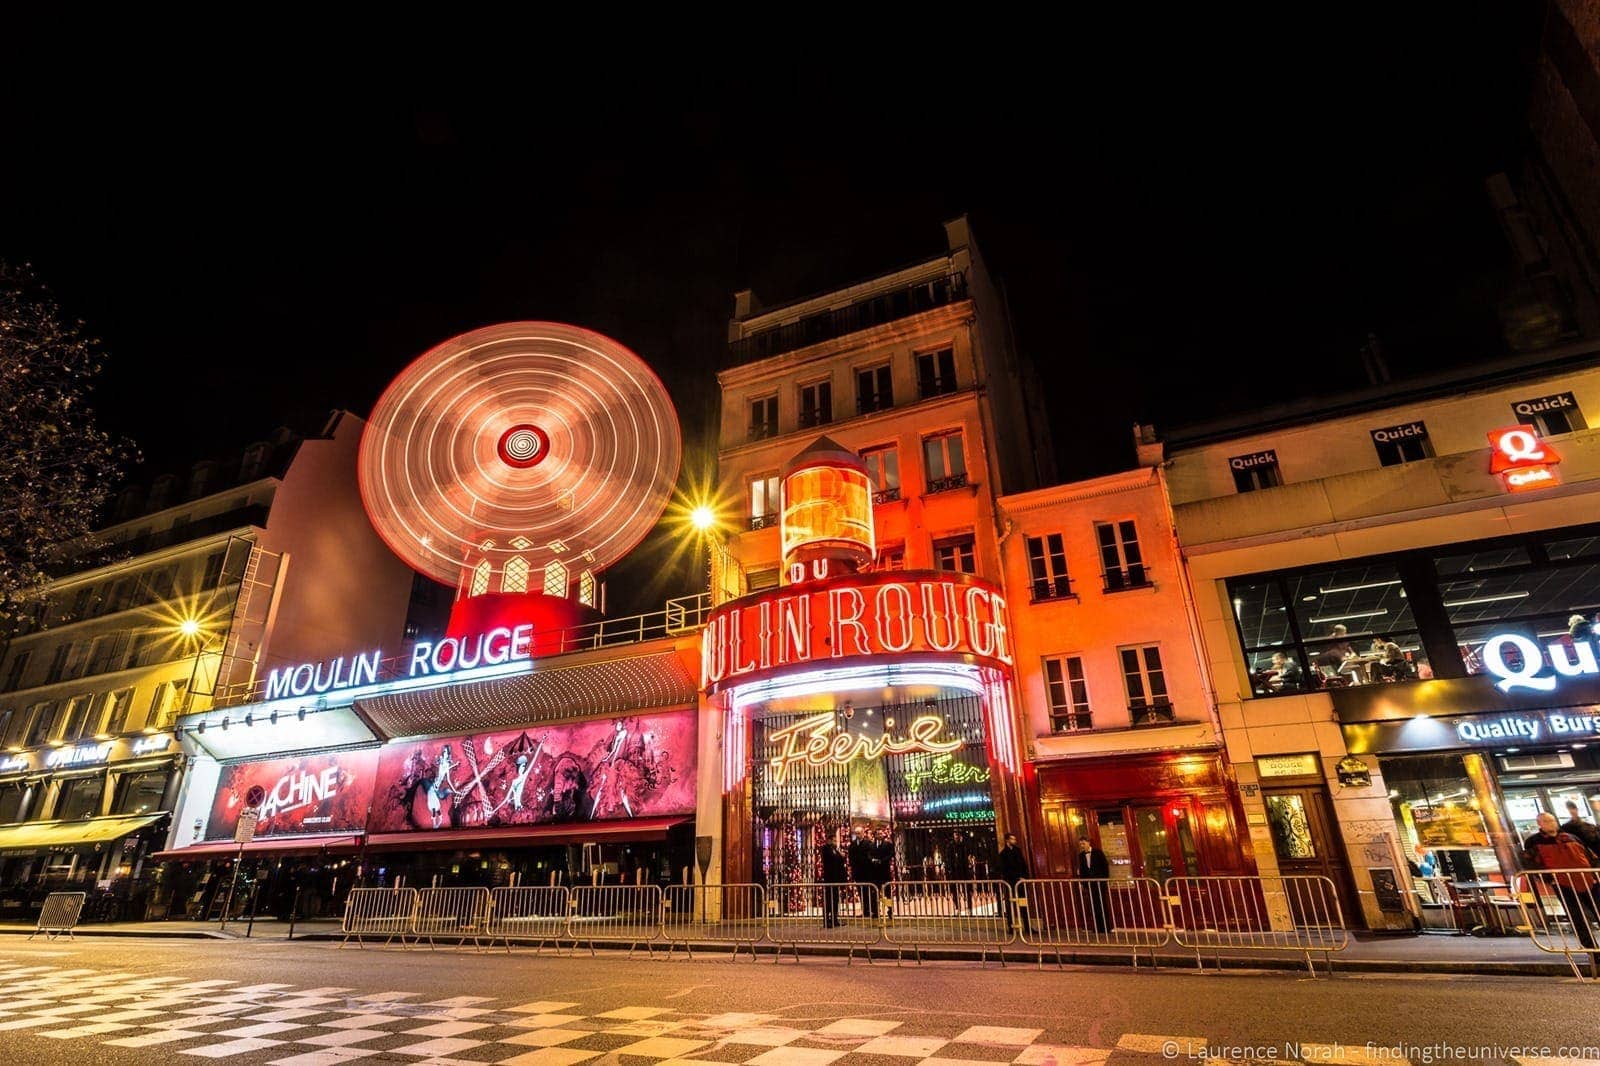 Moulin Rouge Tips: 10 Tips to Enjoy the Show - dipkiss travels